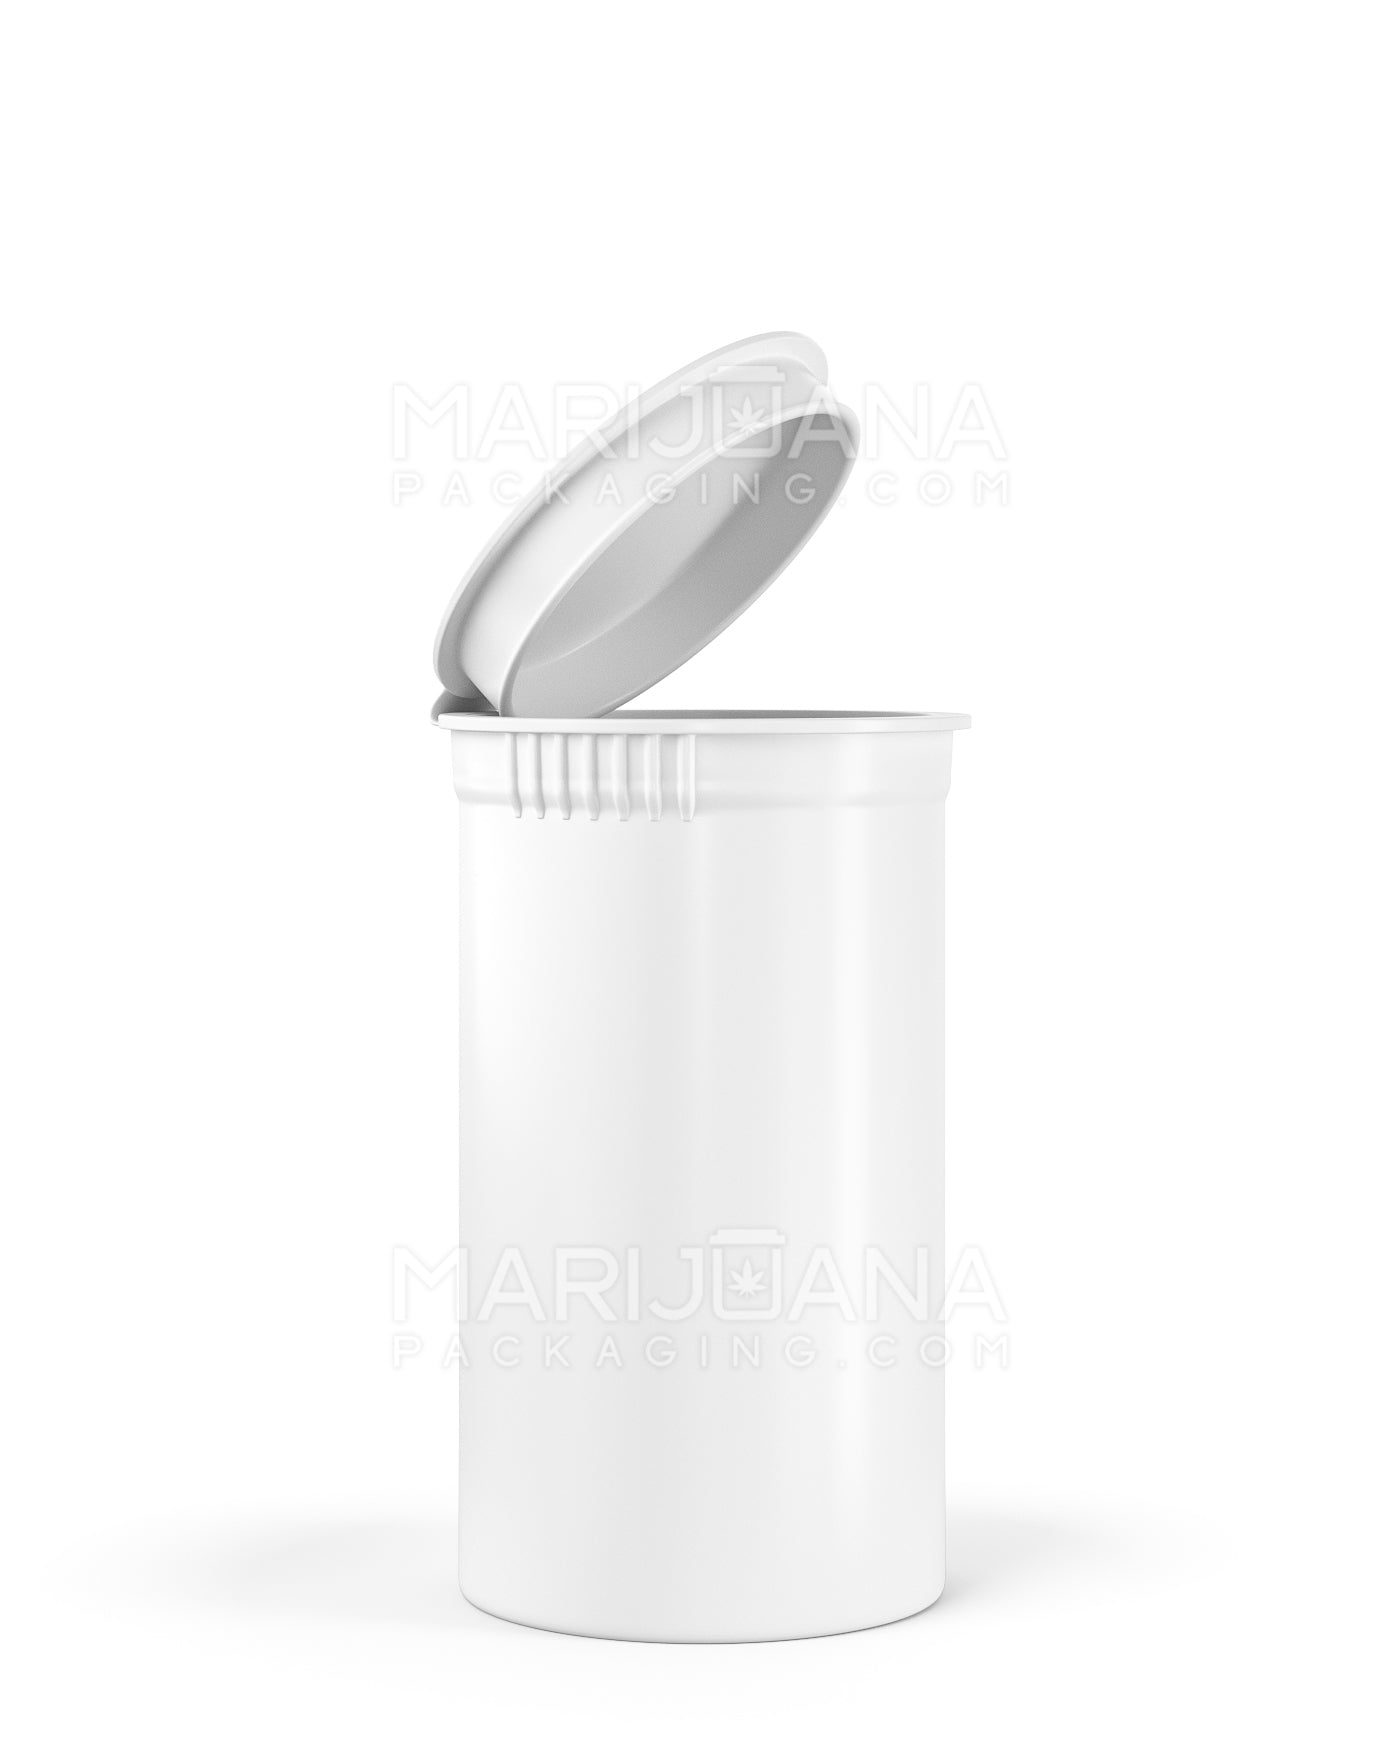 Child Resistant & Sustainable | 100% Biodegradable Opaque White Pop Top Bottles | 19dr - 3.5g - 225 Count - 1